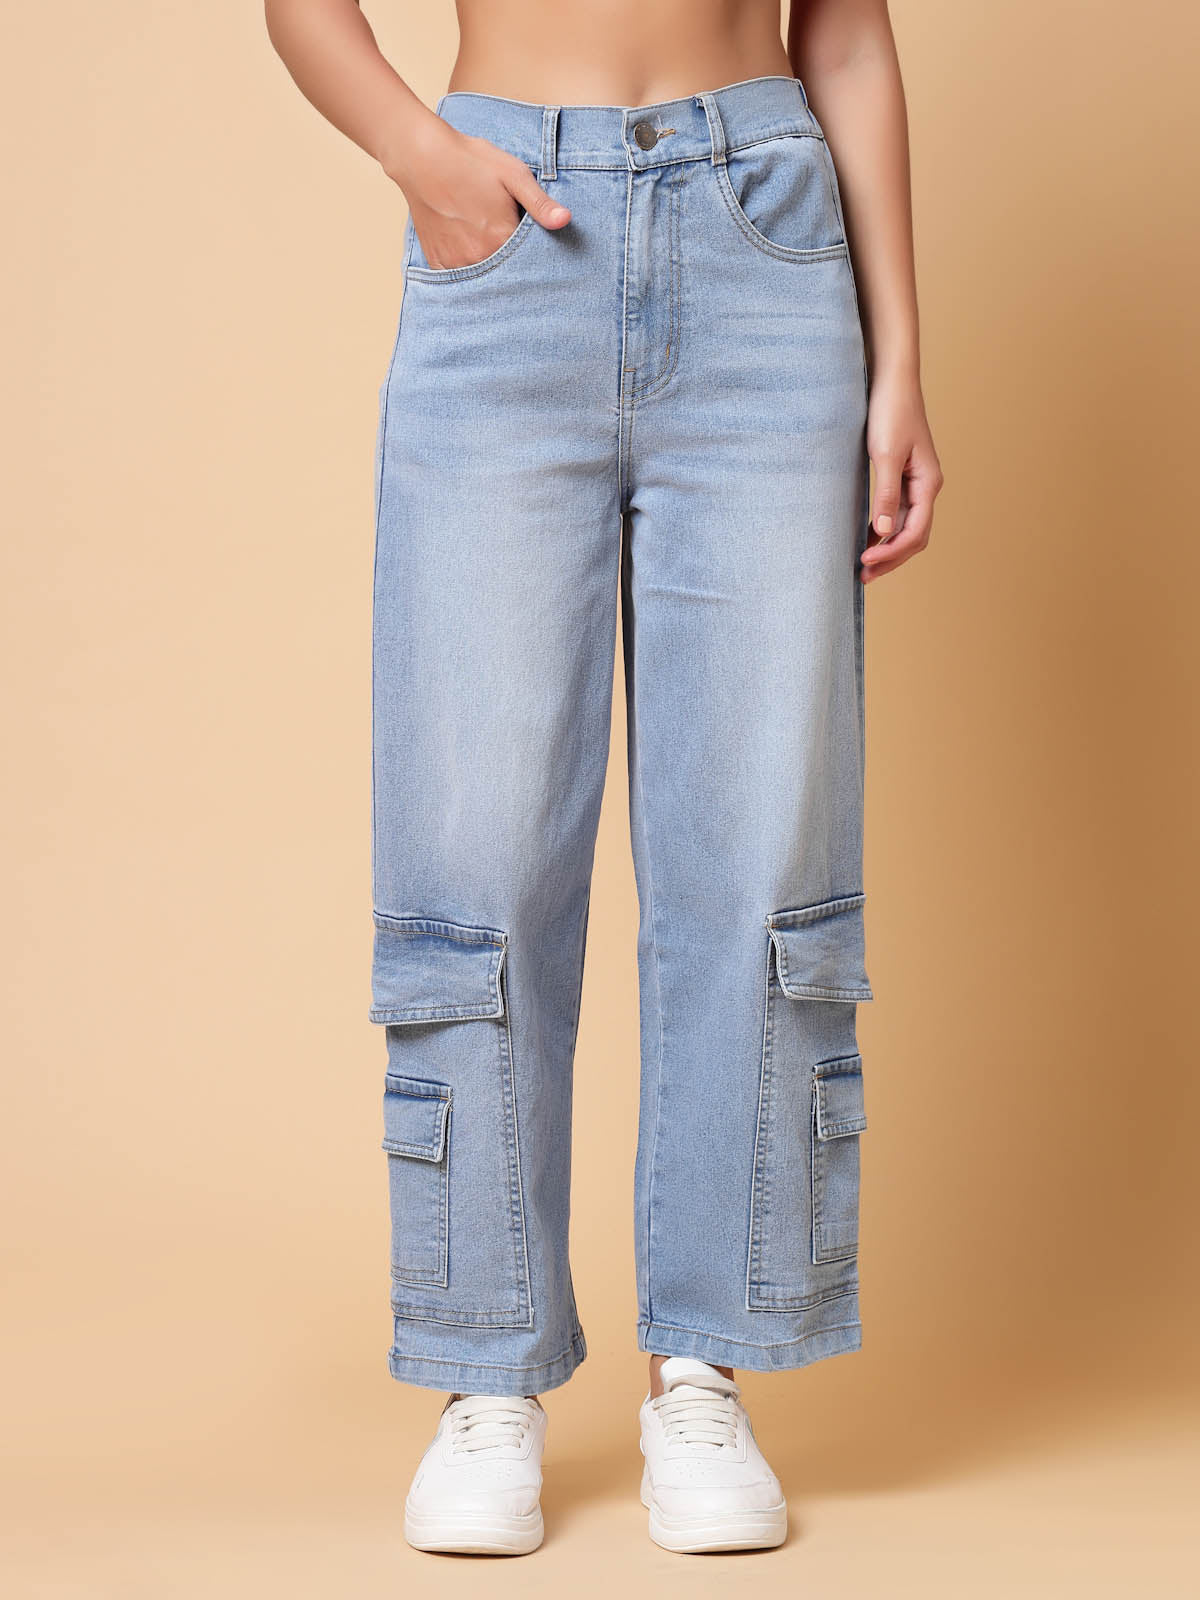 German brand launches 100 percent recycled jeans wear - TEXtalks | let's  talk textiles...